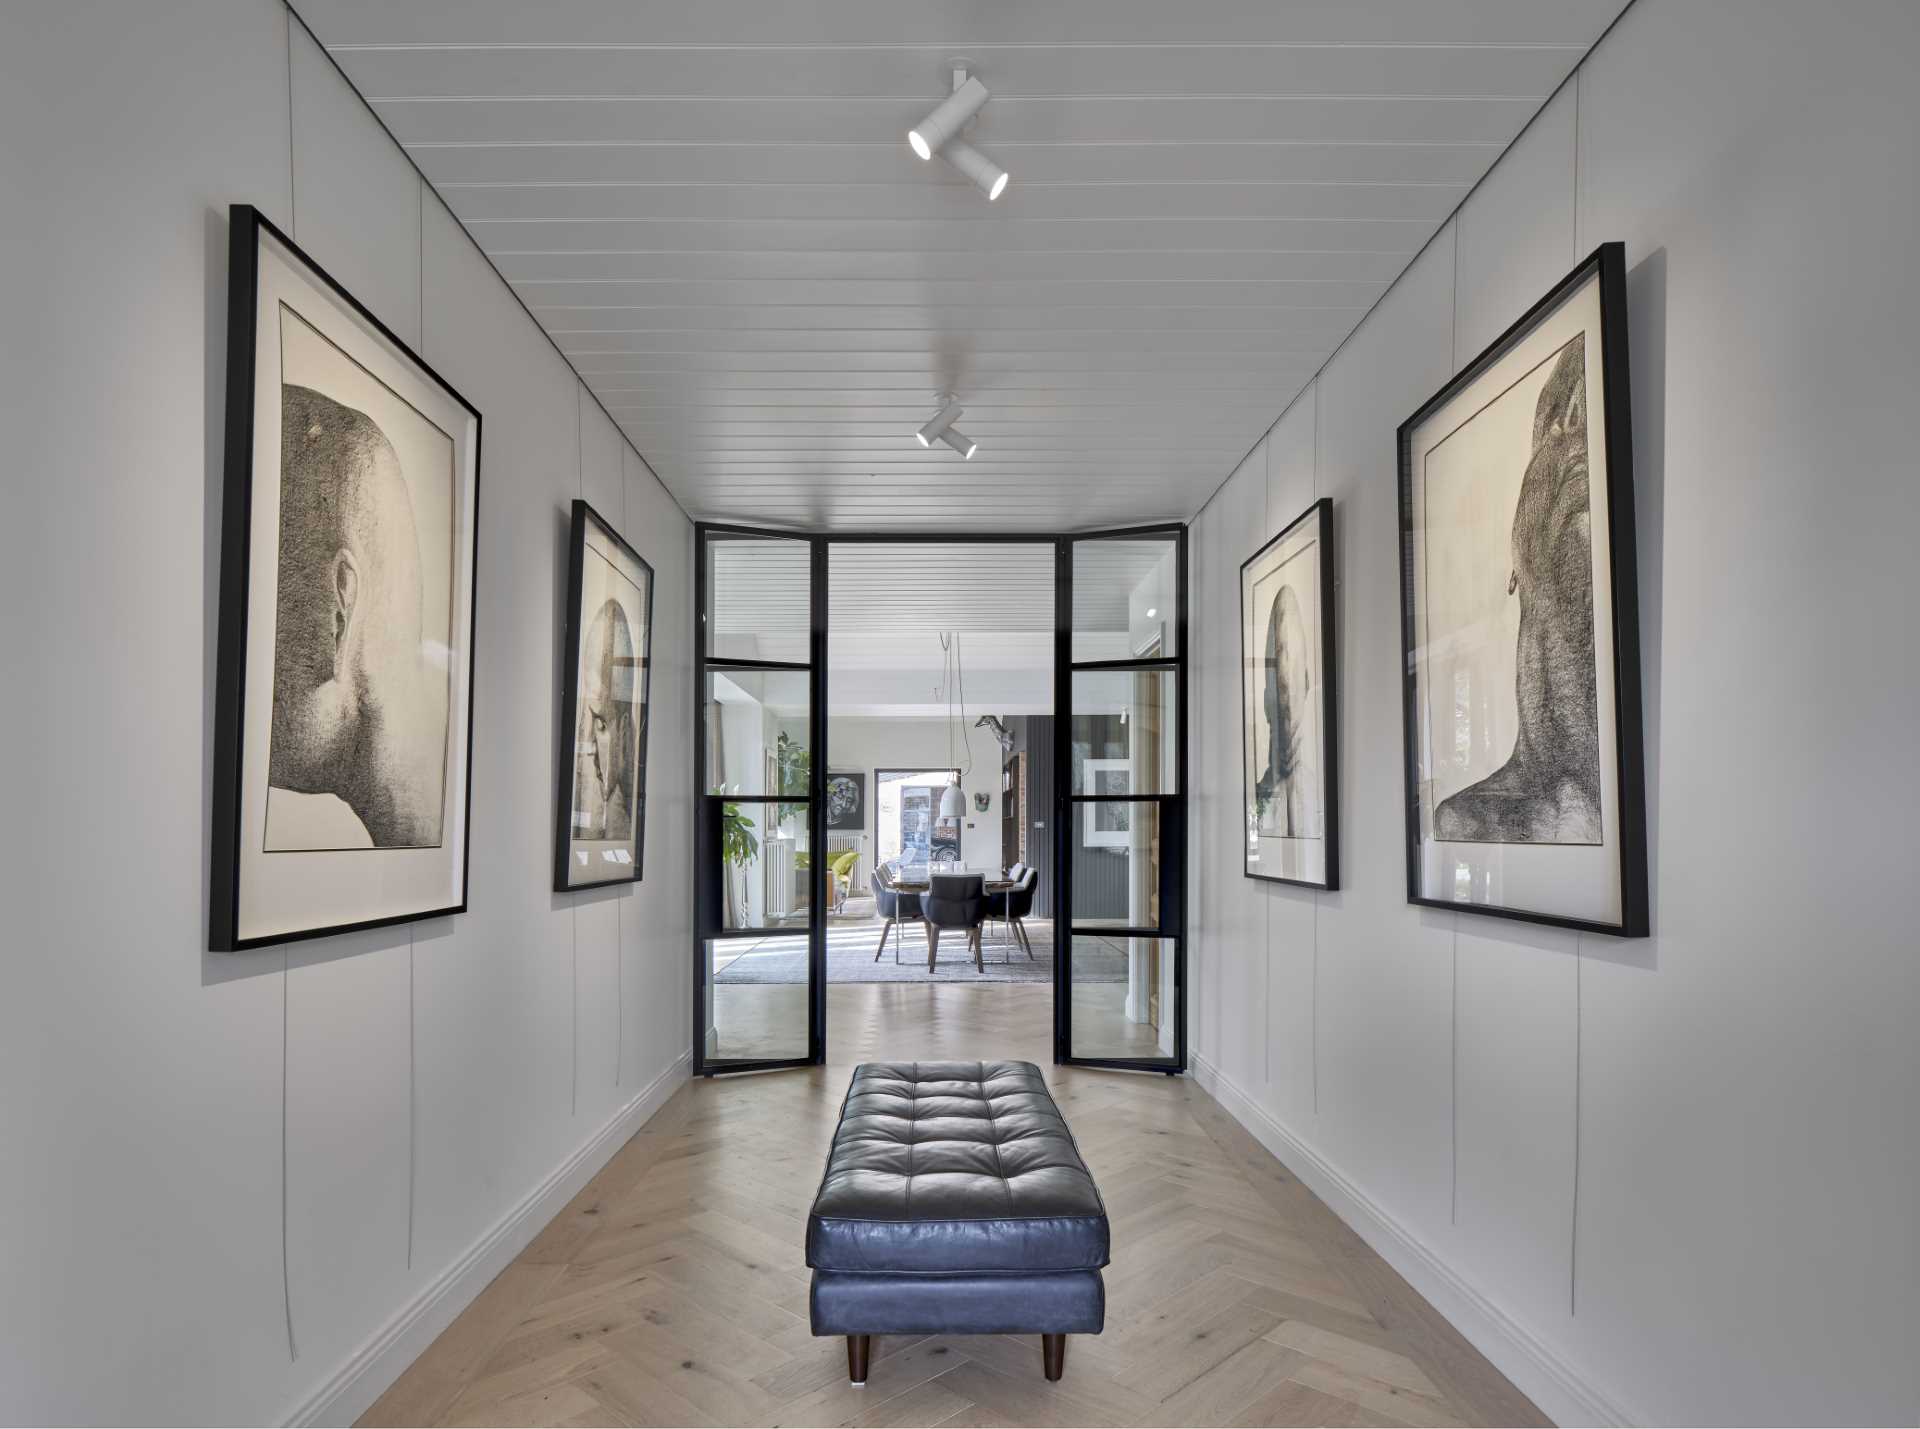 Inside this home, there's engineered timber flooring and white walls filled with artwork.